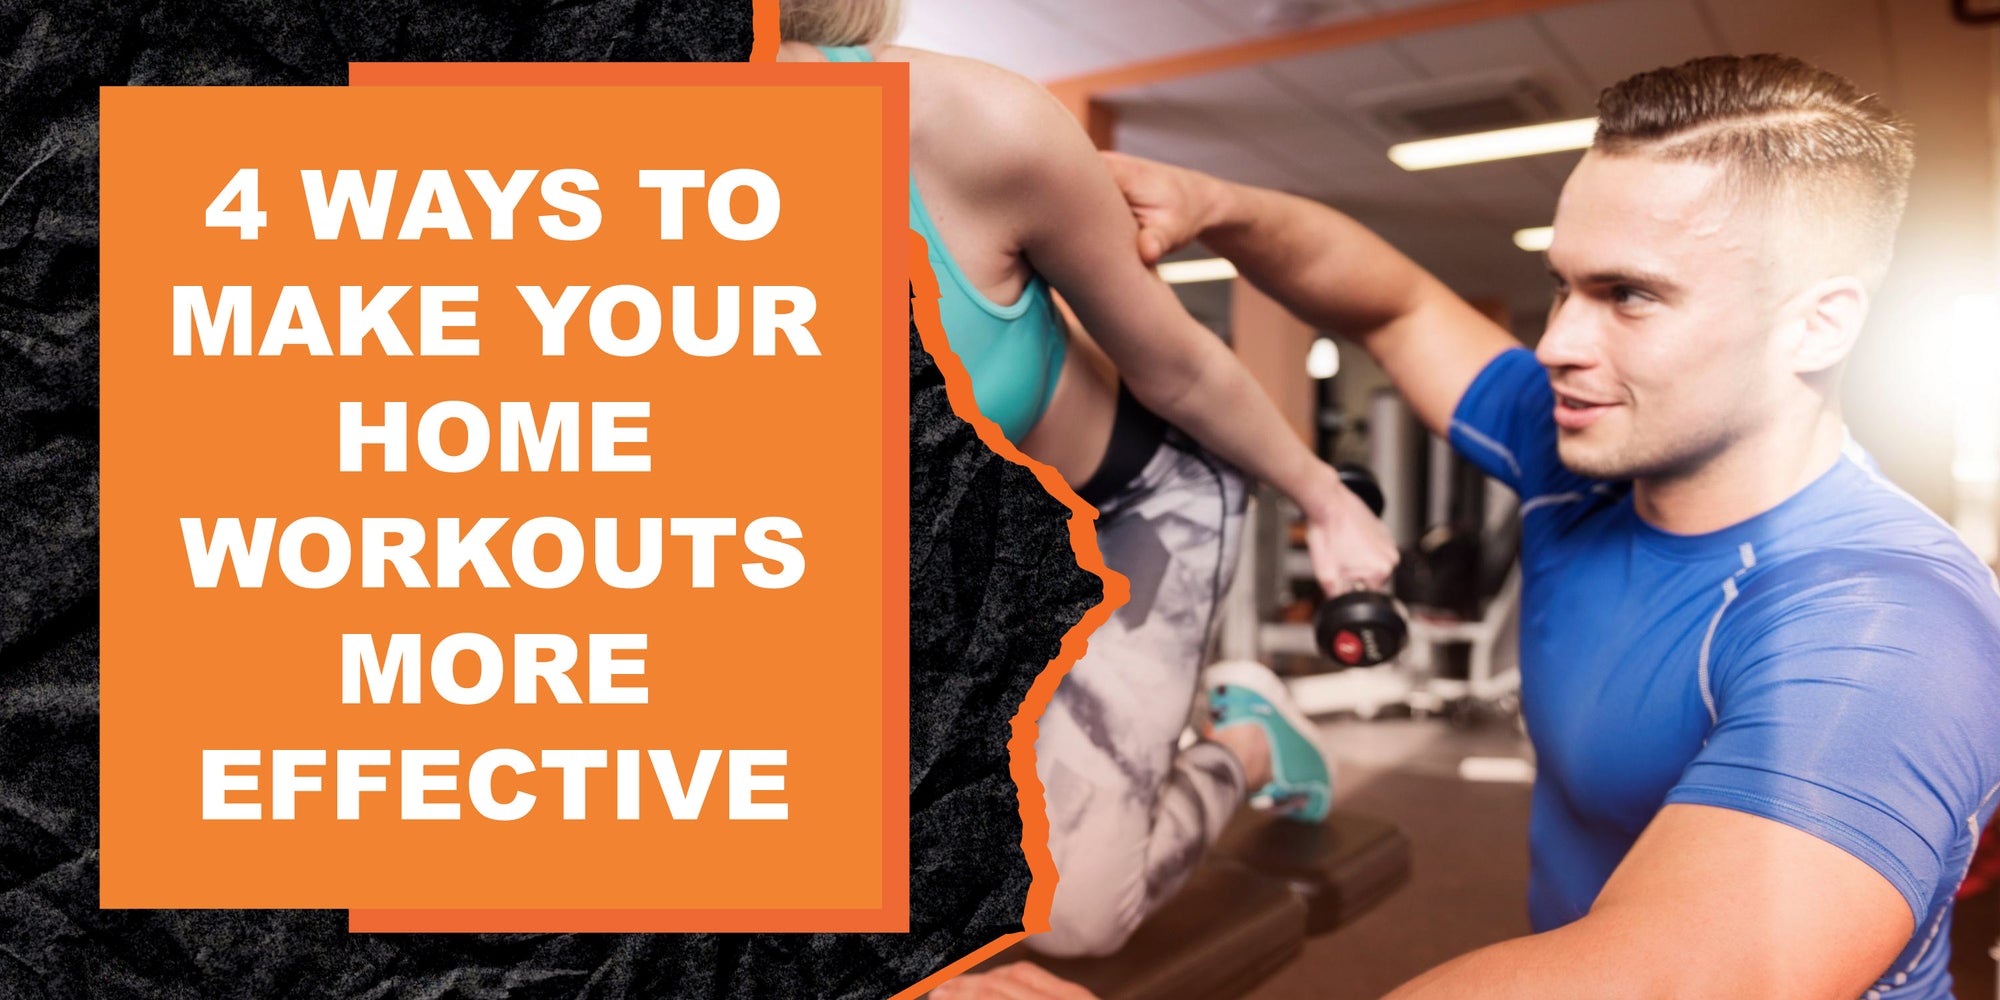 4 Ways to Make Your Home Workouts More Effective